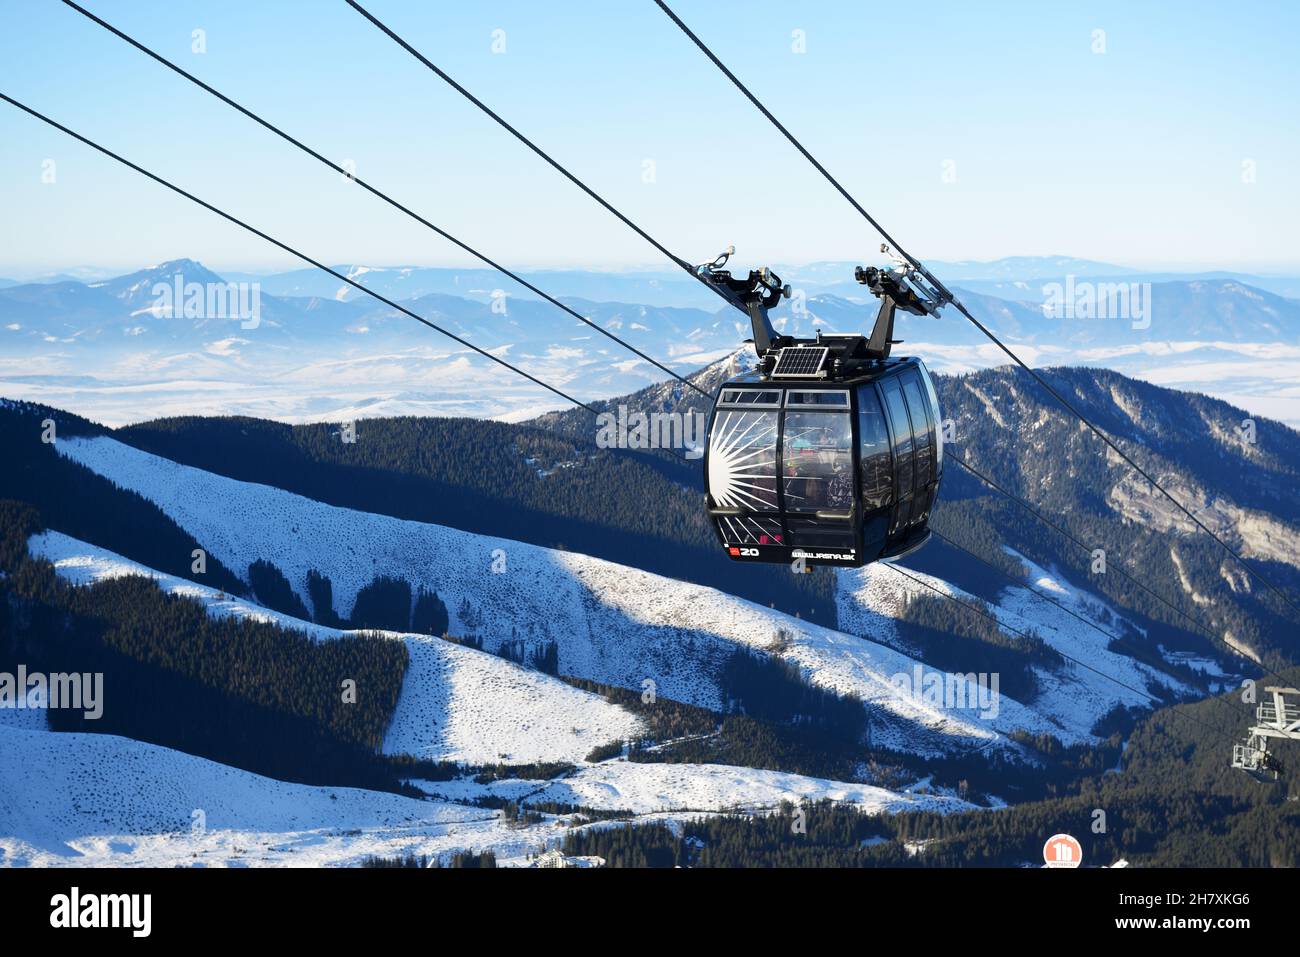 JASNA, SLOVAKIA - JANUARY 23:  The cabins of cableway on Chopok station in Jasna Low Tatras. It is the largest ski resort in Slovakia with 49 km of pi Stock Photo